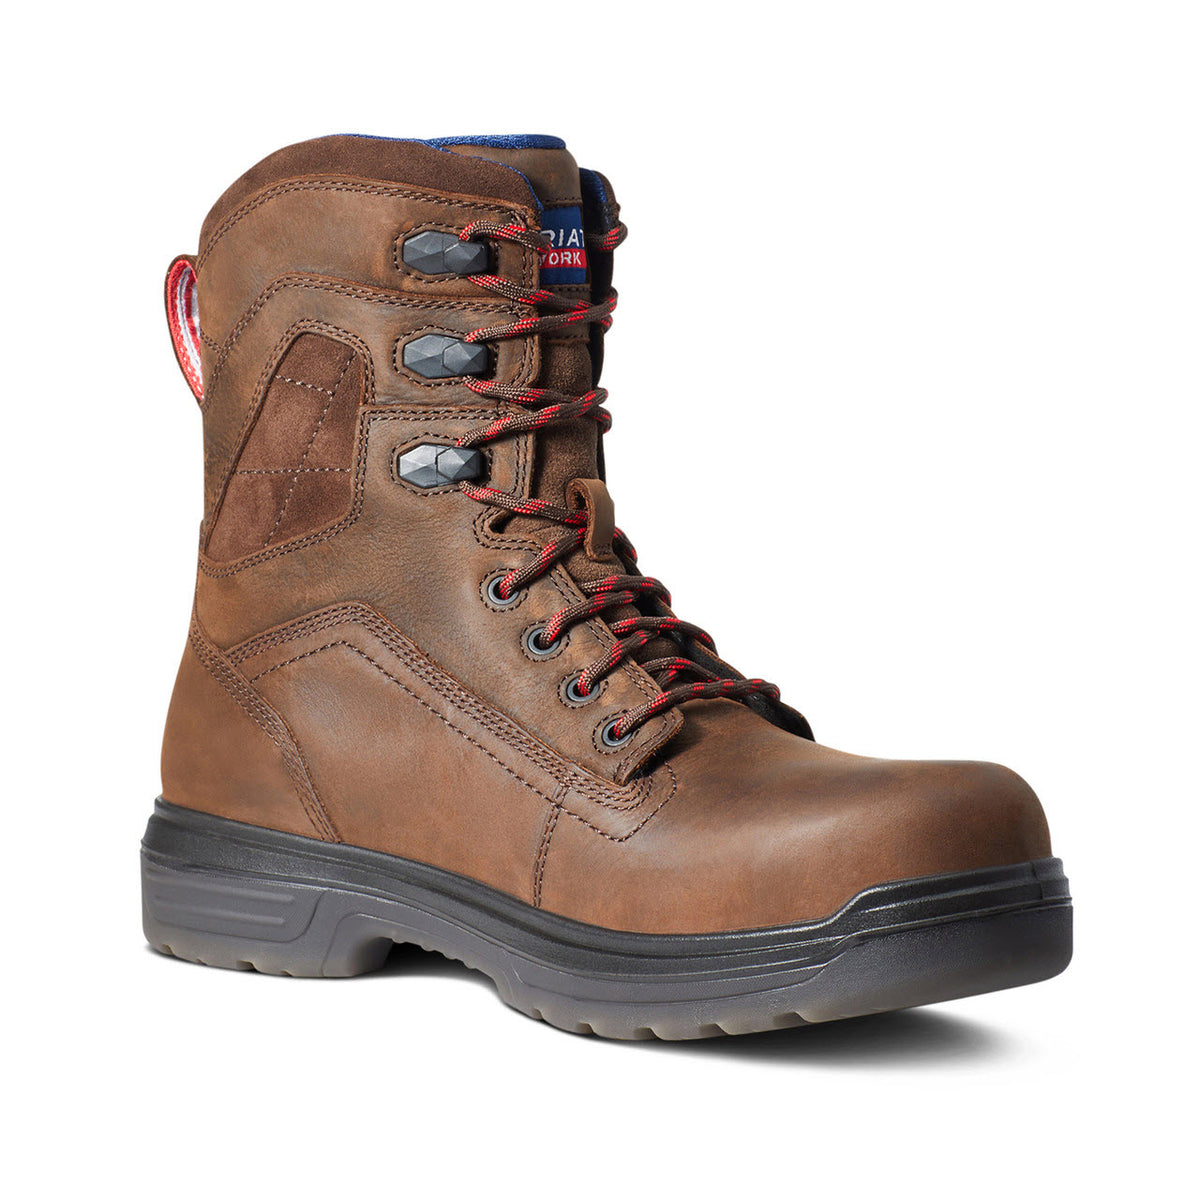 Ariat brown leather work boot with red laces and a black sole, featuring DRYShield waterproof-breathable technology, isolated on a white background.